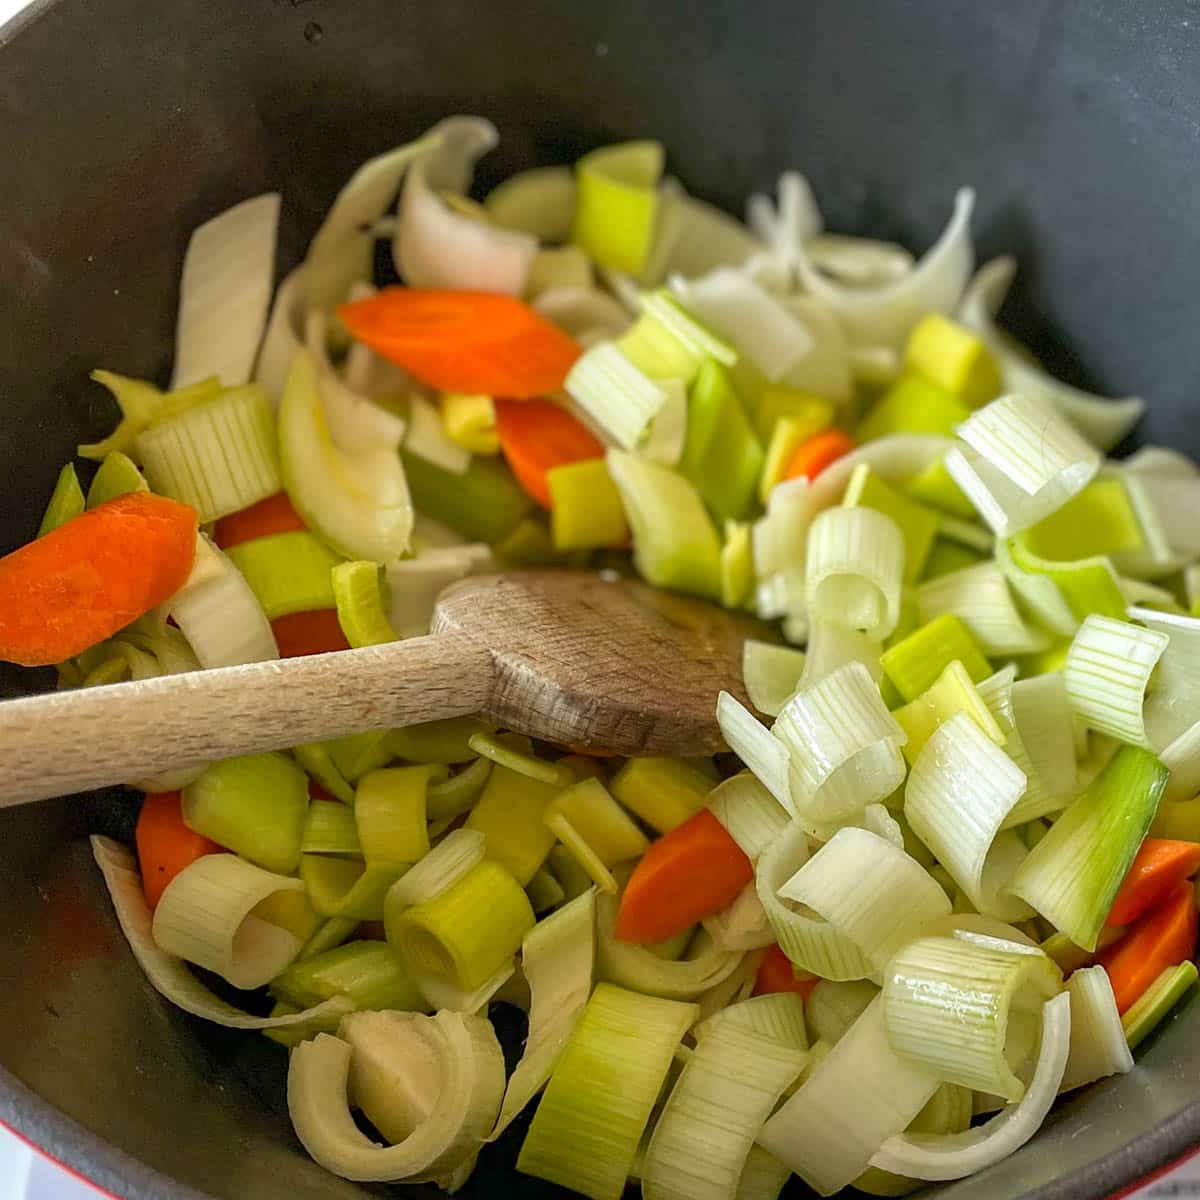 Leeks, celery, and carrots are stirred with wooden spoon in a black cast iron pot.